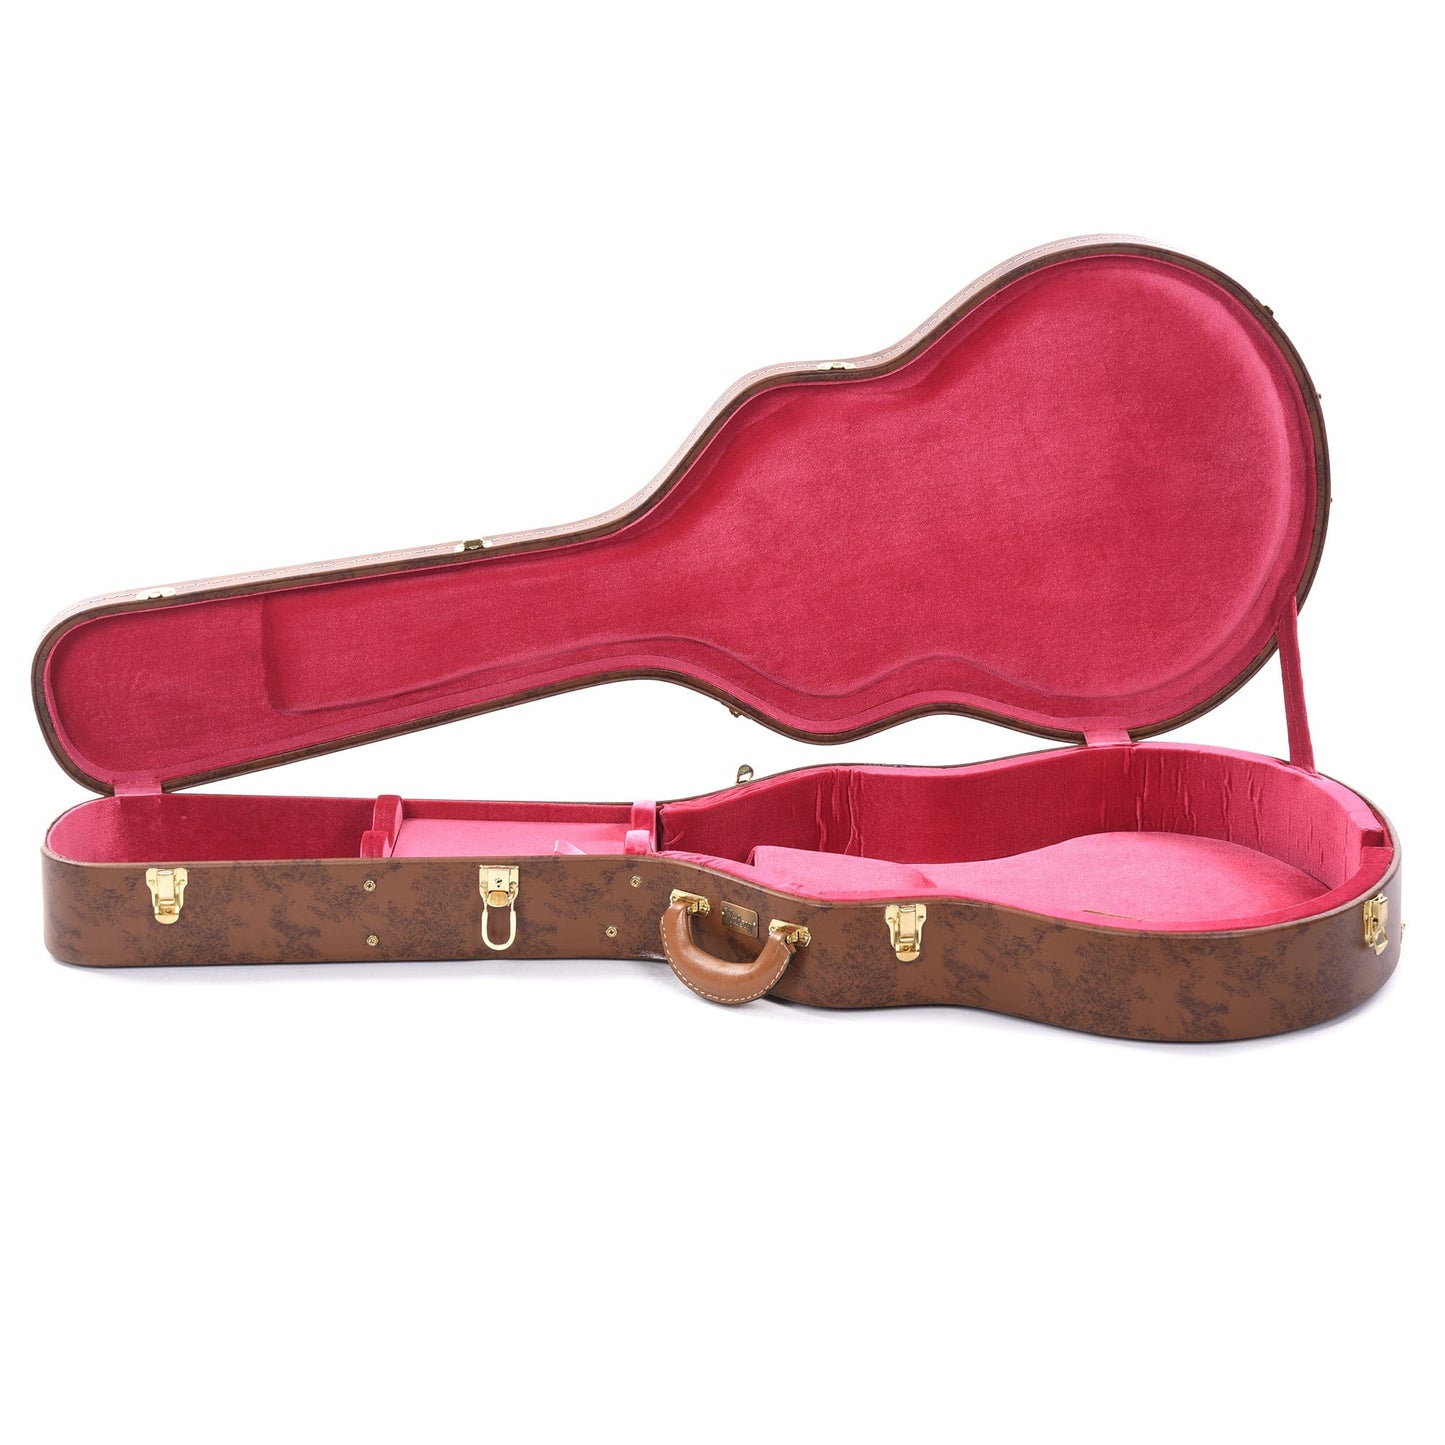 Lifton Historic ES-335 Hardshell Case Brown/Pink Accessories / Cases and Gig Bags / Guitar Cases